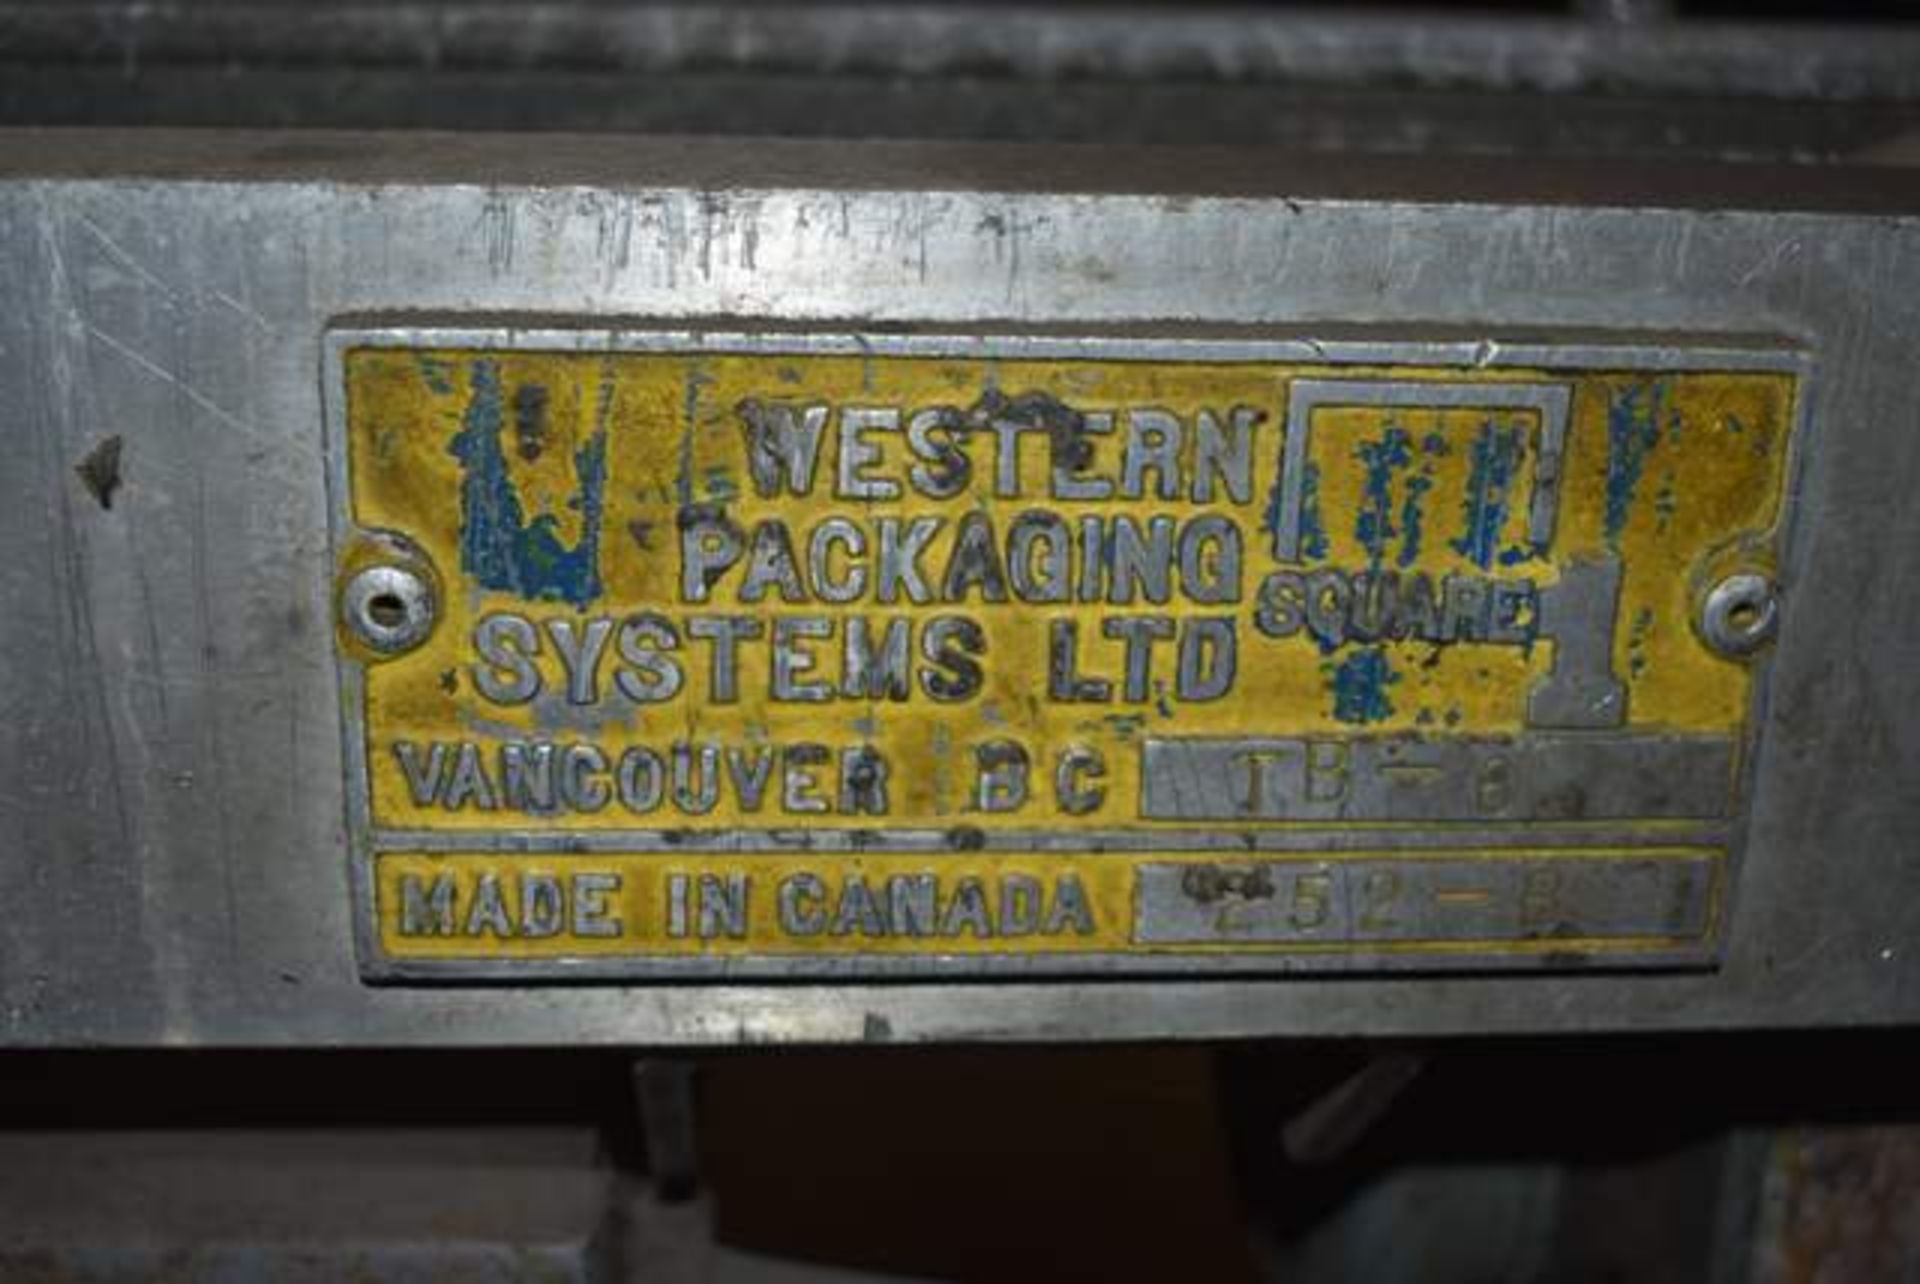 West Packing Systems Model #TB-6 Packaging Machine, SN 252B - Image 2 of 4